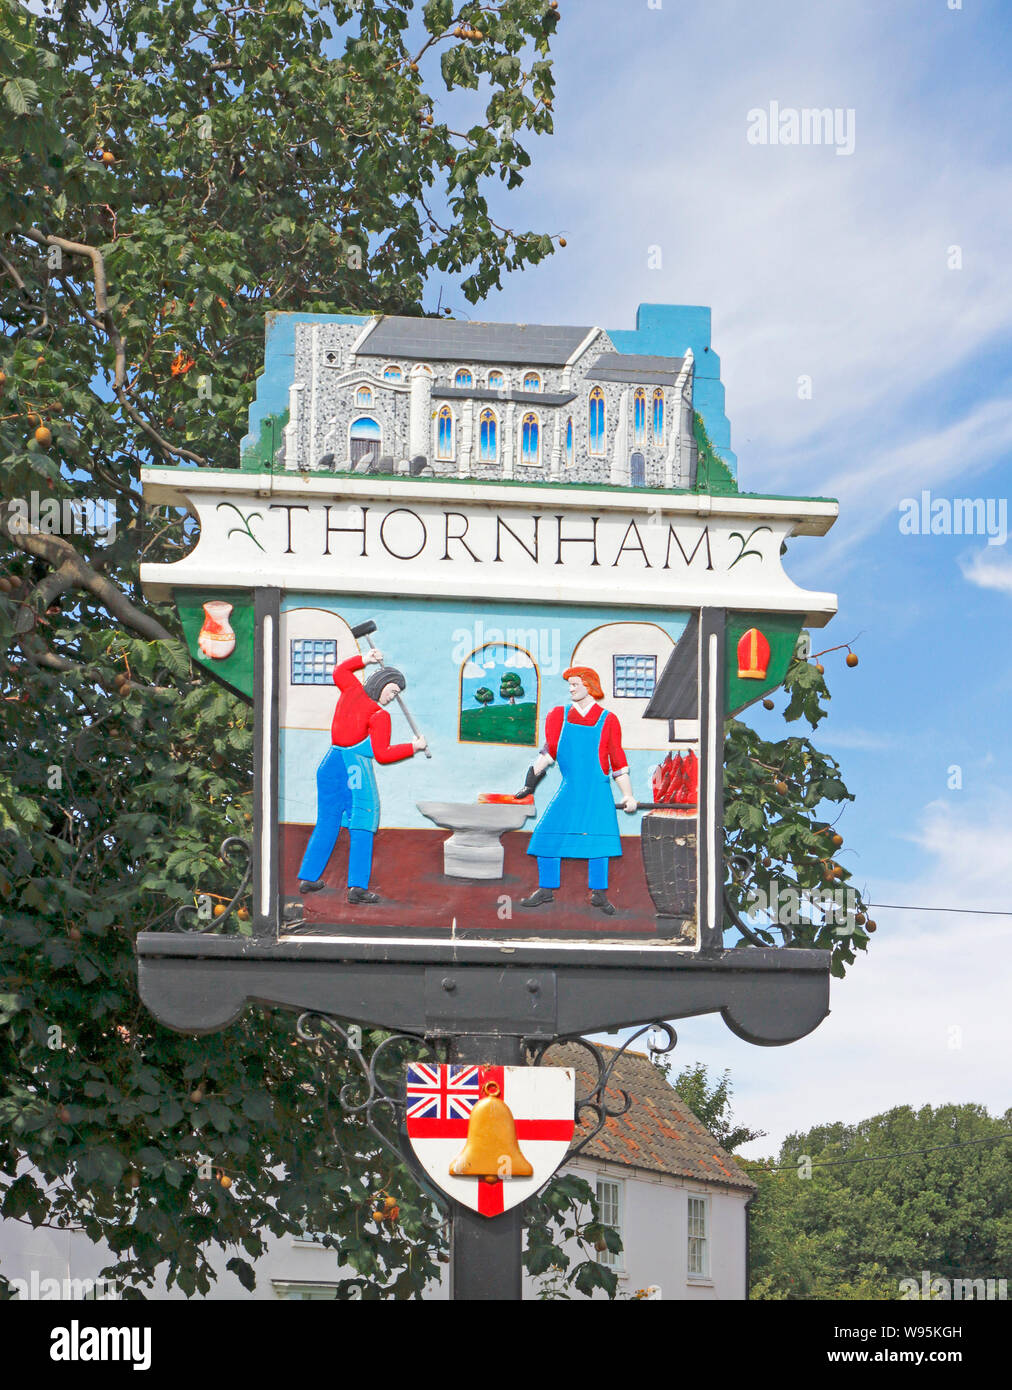 A view of the east side of the village sign on the A149 coast road in North Norfolk at Thornham, Norfolk, England, United Kingdom, Europe. Stock Photo